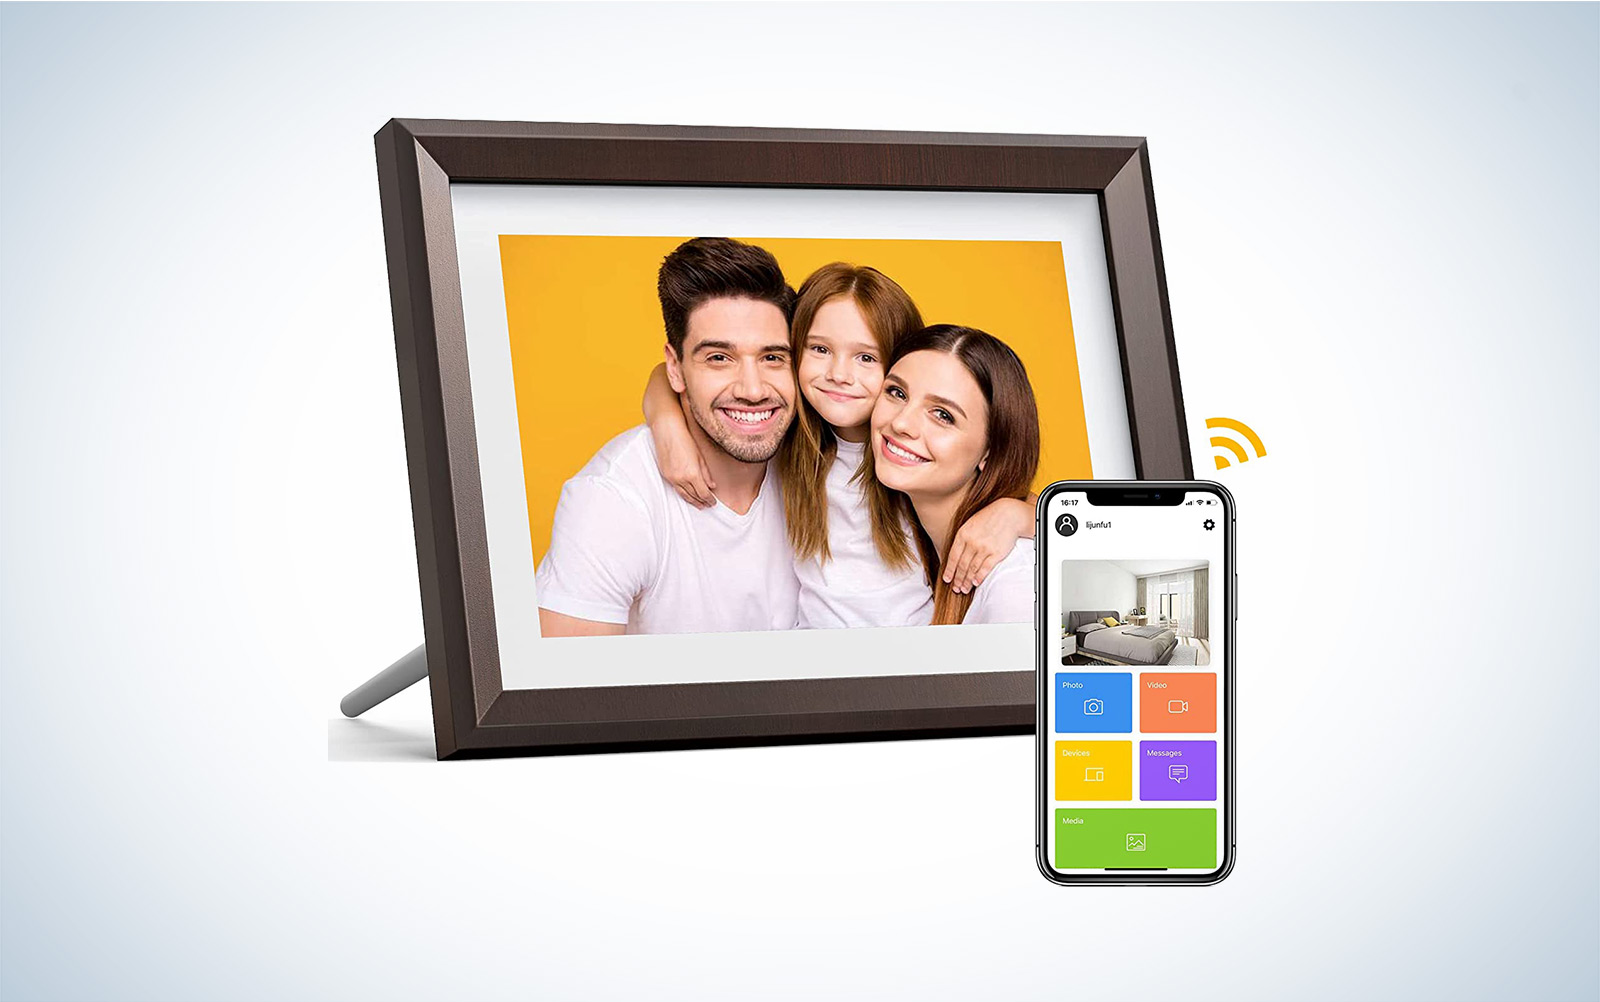 Dragon Touch Digital Picture Frame is the best digital picture frame for most people.